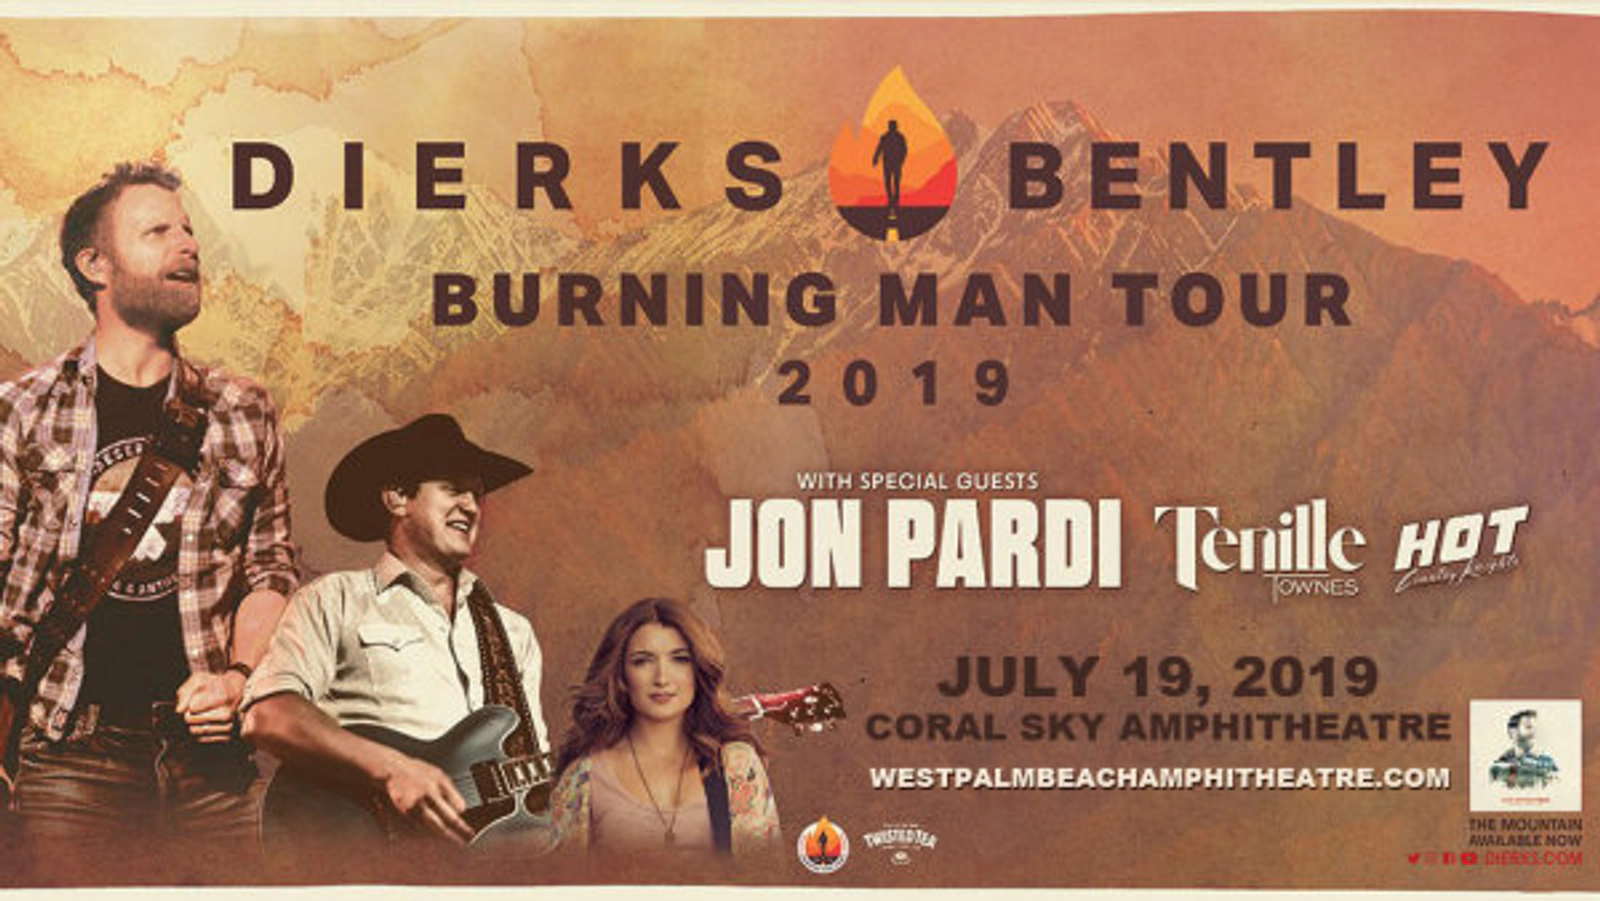 Win Your Way To See Dierks Bentley! - Thumbnail Image